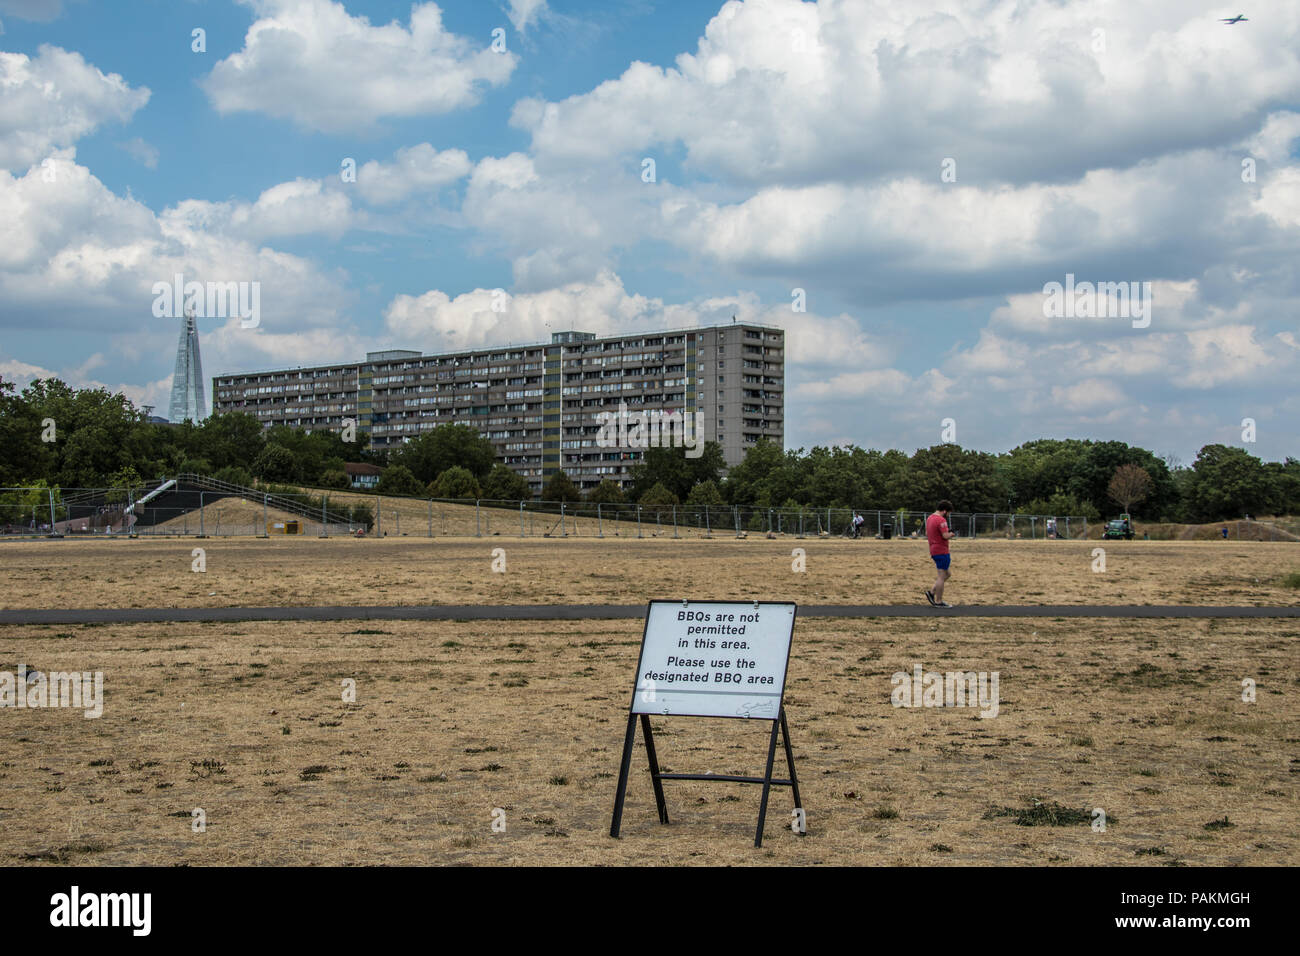 London,UK. 24 July, 2018. London gets some respite with some cloud but still no rain in parched South London where the grass in Burgess park looks more like sand with the Wendover block of the Aylesbury estate in the background with the Shard. David Rowe/Alamy Live News. Stock Photo